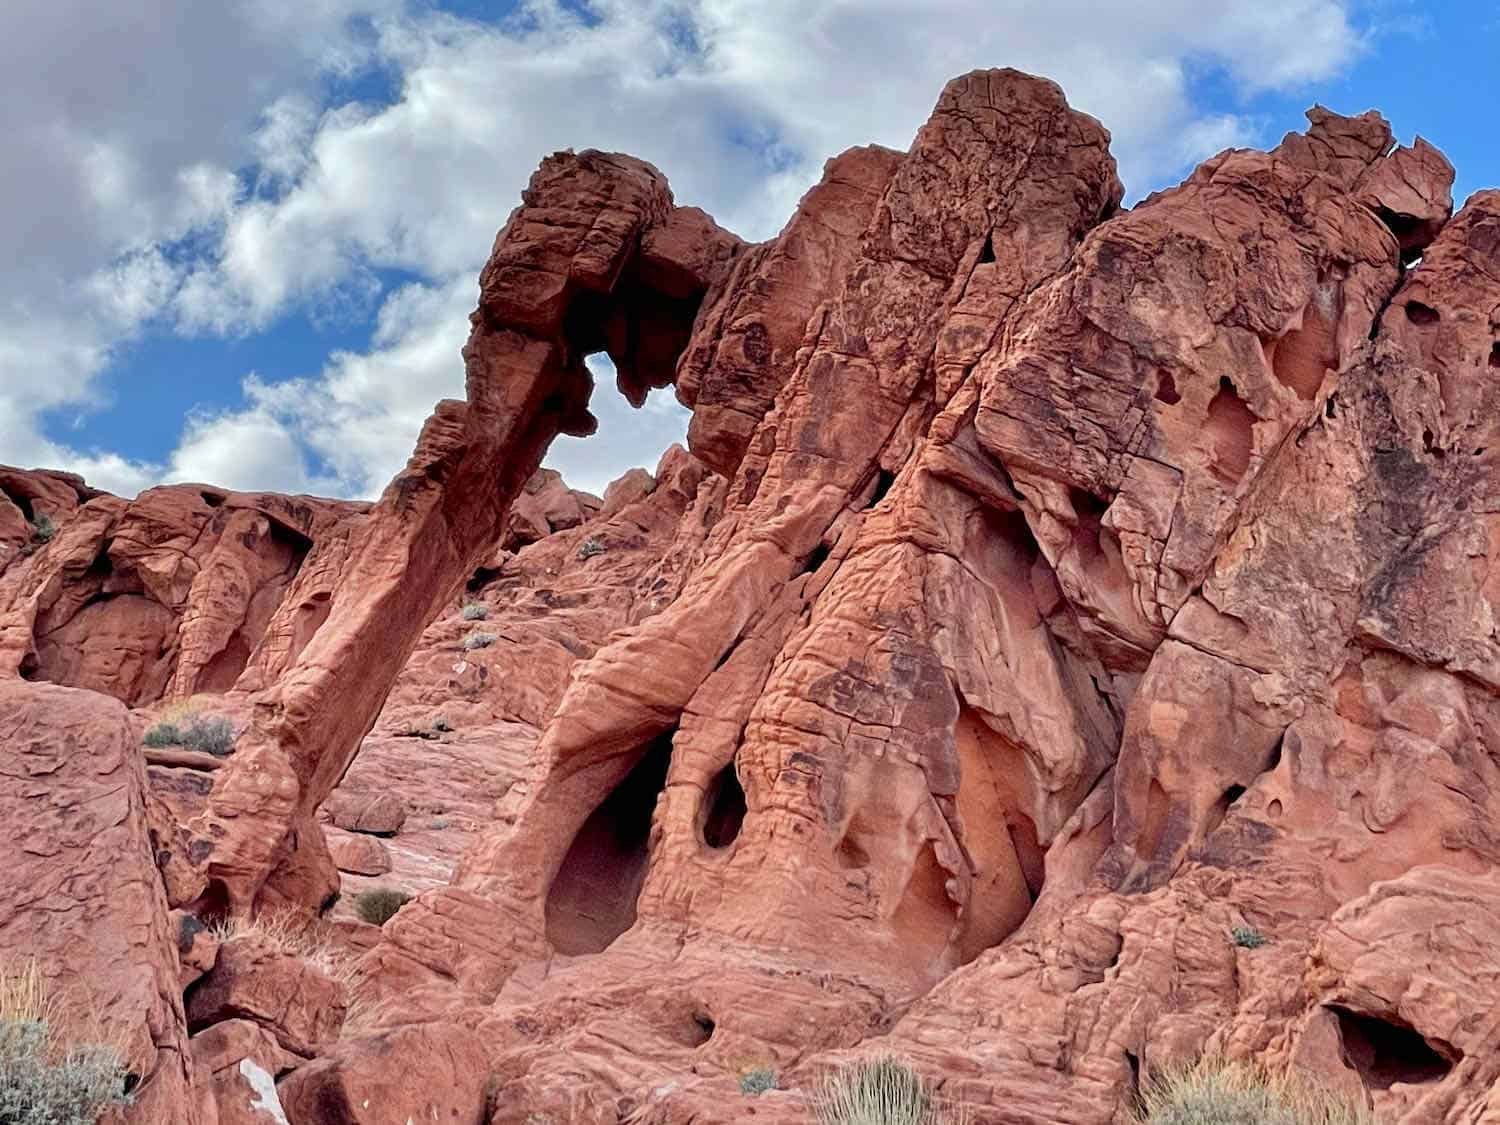 A red rock formation that looks like an elephant in Valley of Fire State Park Nevada.